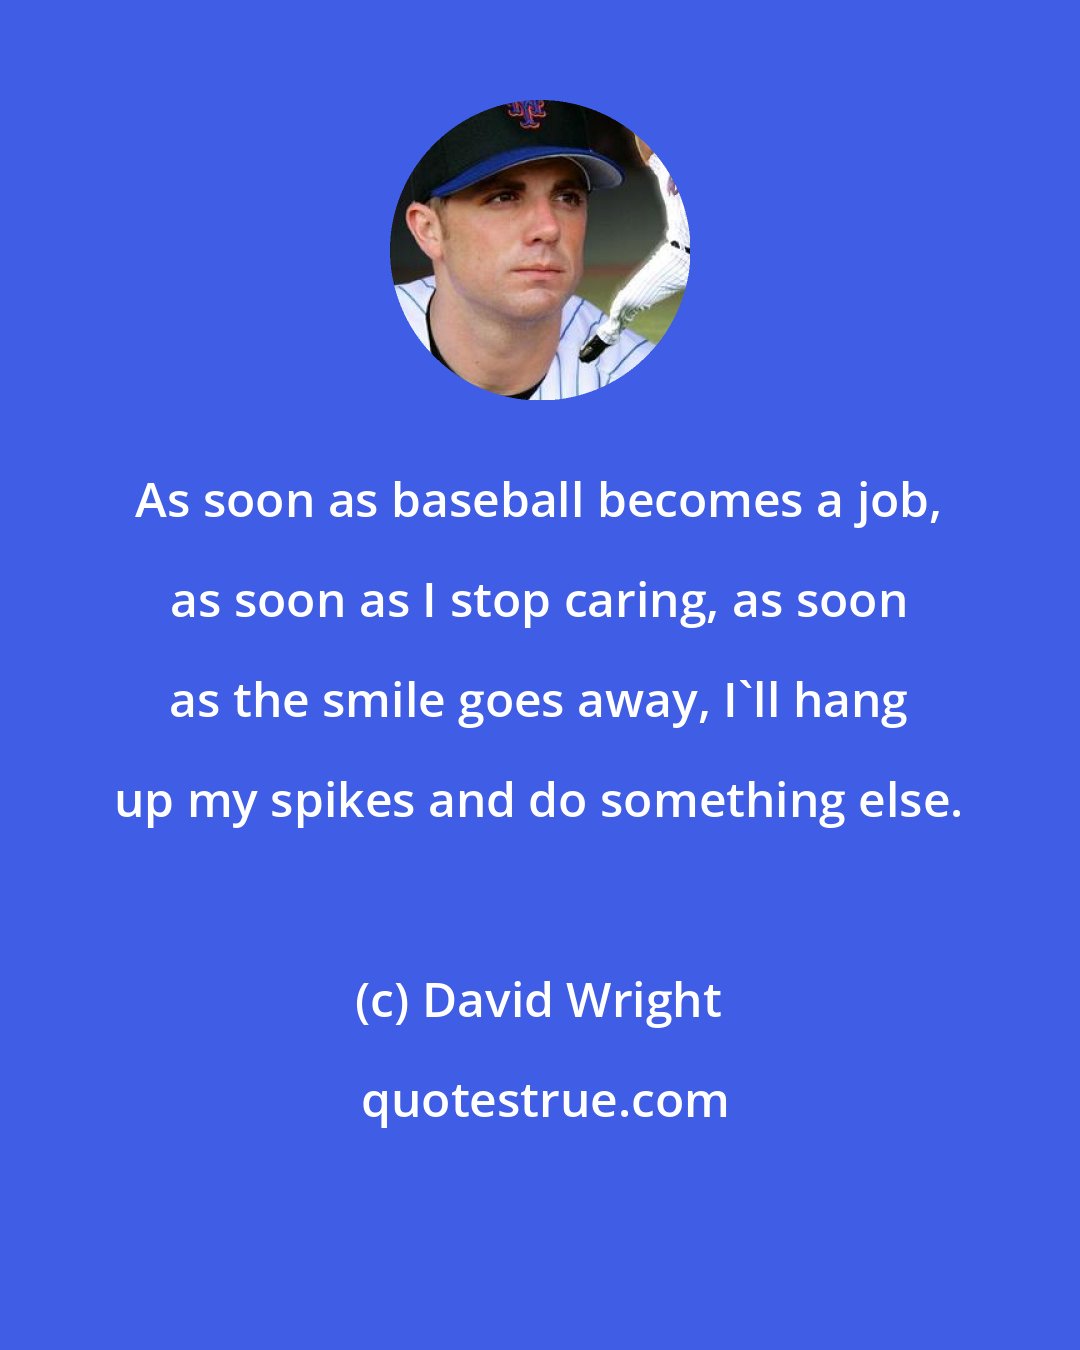 David Wright: As soon as baseball becomes a job, as soon as I stop caring, as soon as the smile goes away, I'll hang up my spikes and do something else.